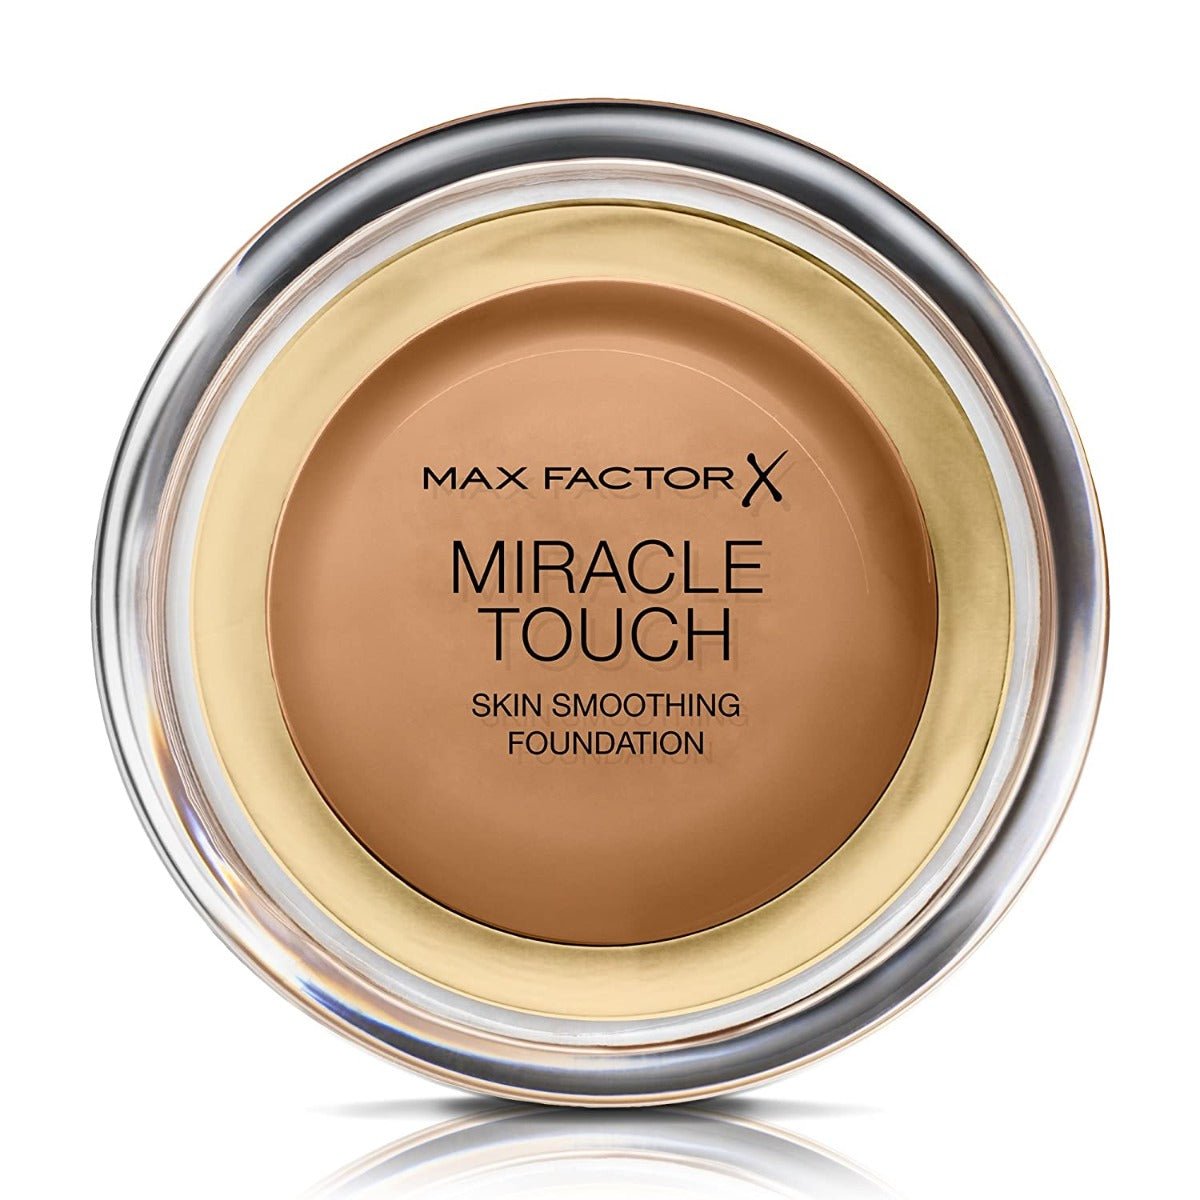 Maxfactor Miracle Touch Compact Foundation Liquid Illusion - AllurebeautypkMaxfactor Miracle Touch Compact Foundation Liquid Illusion